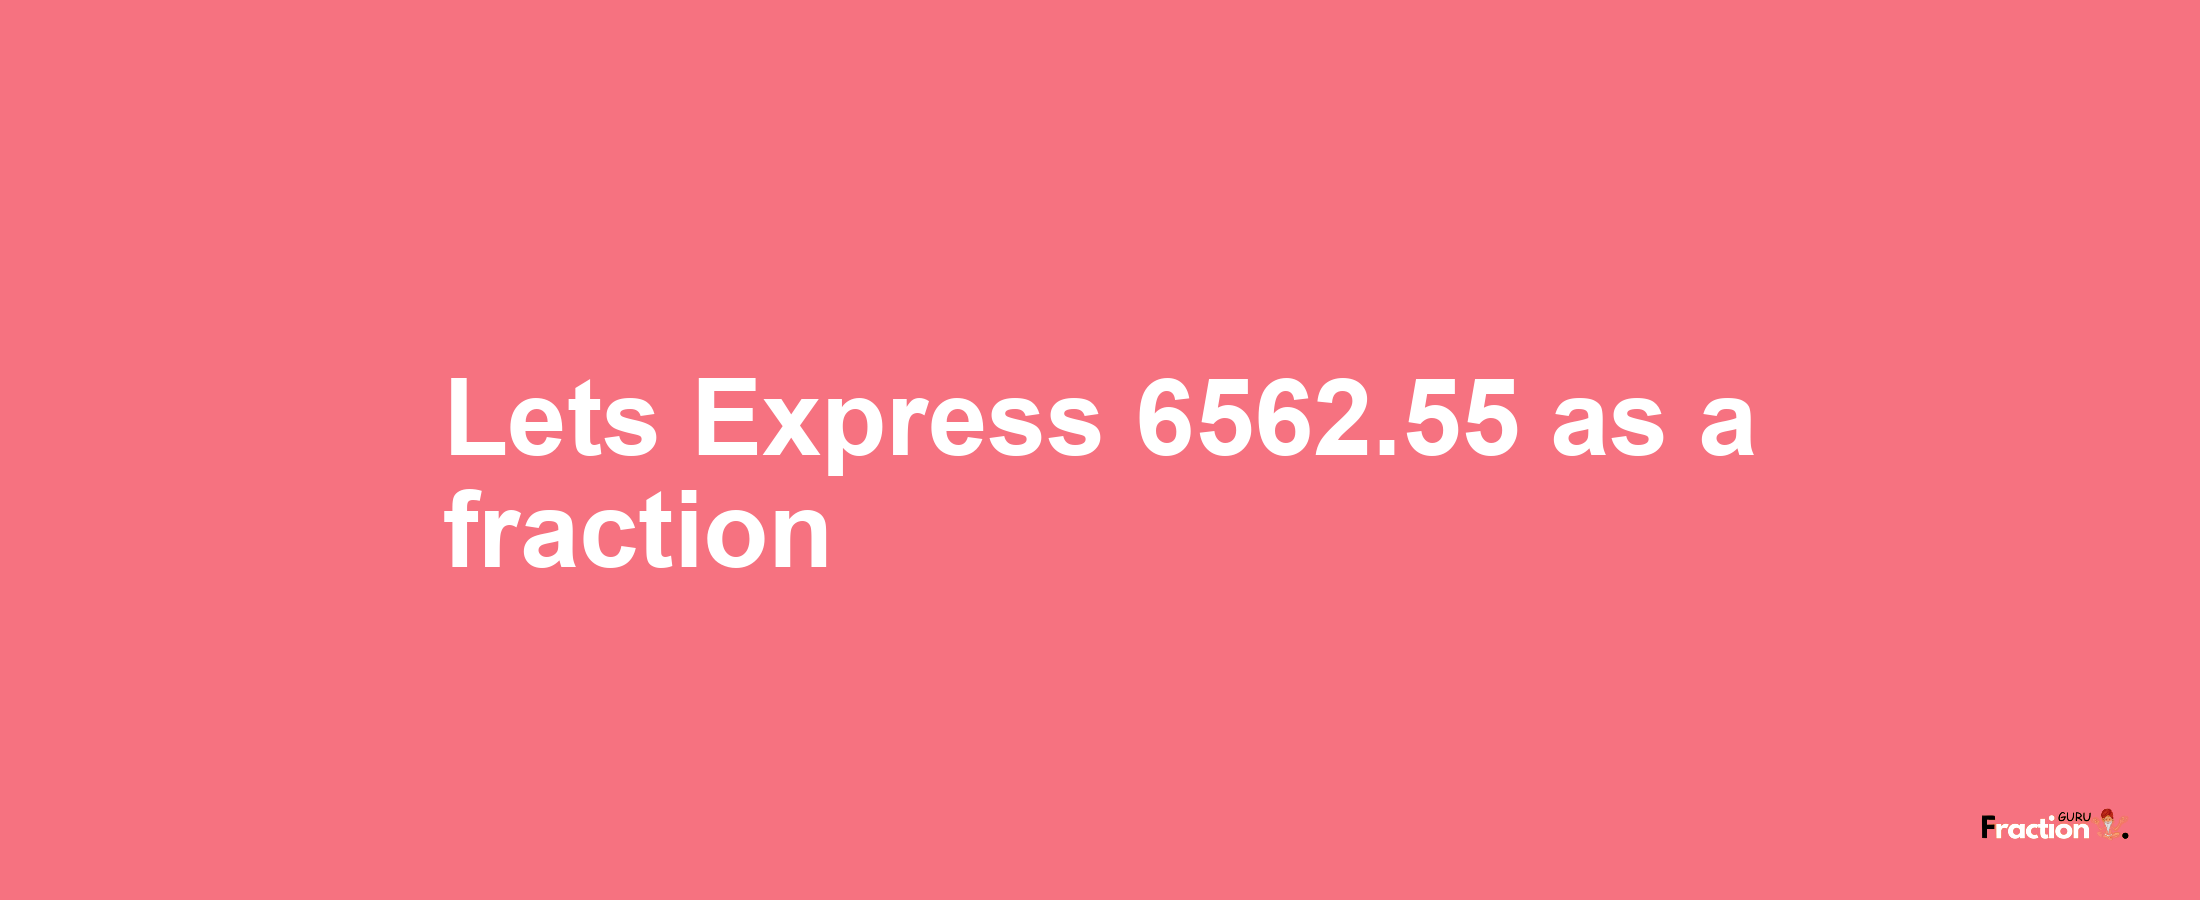 Lets Express 6562.55 as afraction